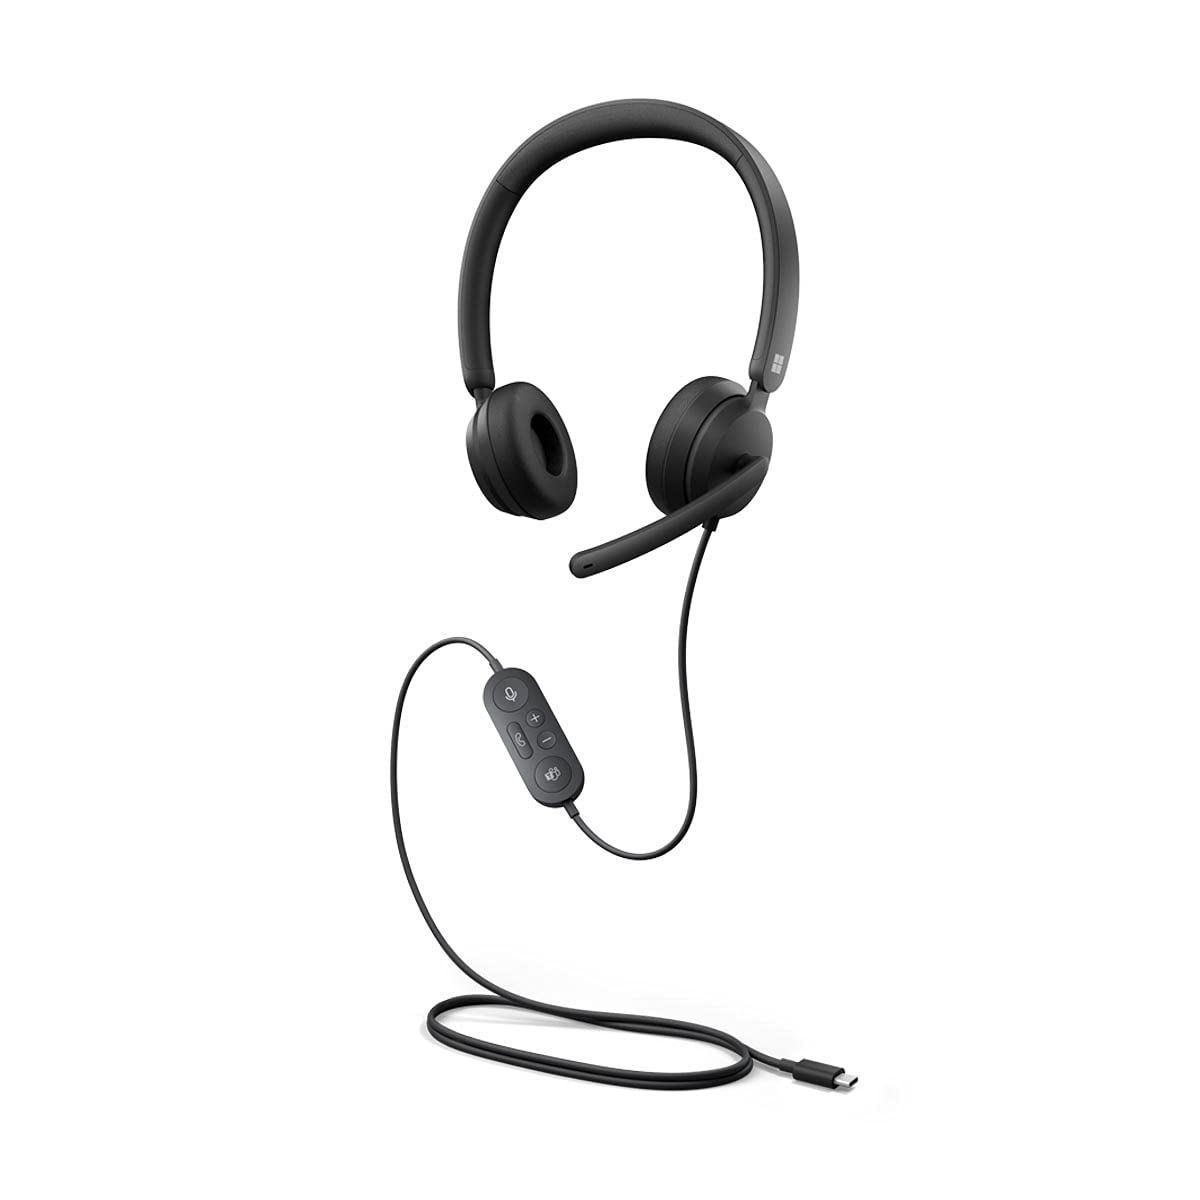 Microsoft Modern USB-C Headset - Wired Headset,On-Ear Stereo Headphones with Noise-Cancelling Microphone, USB-C Connectivity, in-Line Controls, PC/Mac/Laptop - Certified Teams